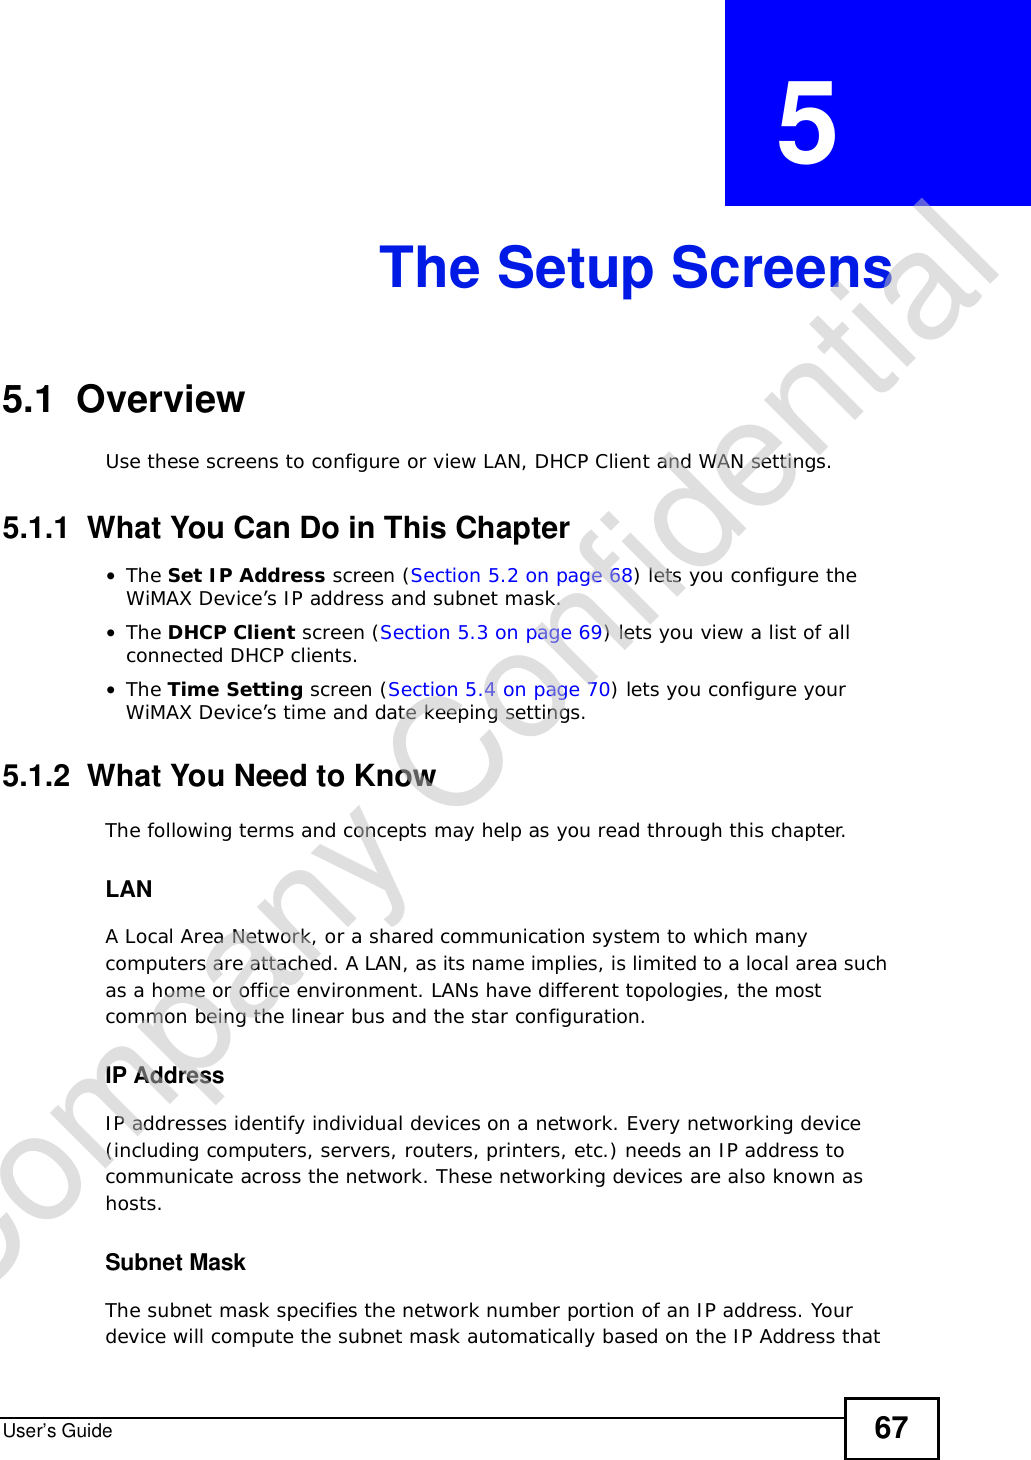 User’s Guide 67CHAPTER  5 The Setup Screens5.1  OverviewUse these screens to configure or view LAN, DHCP Client and WAN settings.5.1.1  What You Can Do in This Chapter•The Set IP Address screen (Section 5.2 on page 68) lets you configure the WiMAX Device’s IP address and subnet mask.•The DHCP Client screen (Section 5.3 on page 69) lets you view a list of all connected DHCP clients.•The Time Setting screen (Section 5.4 on page 70) lets you configure your WiMAX Device’s time and date keeping settings.5.1.2  What You Need to KnowThe following terms and concepts may help as you read through this chapter.LANA Local Area Network, or a shared communication system to which many computers are attached. A LAN, as its name implies, is limited to a local area such as a home or office environment. LANs have different topologies, the most common being the linear bus and the star configuration.IP AddressIP addresses identify individual devices on a network. Every networking device (including computers, servers, routers, printers, etc.) needs an IP address to communicate across the network. These networking devices are also known as hosts.Subnet MaskThe subnet mask specifies the network number portion of an IP address. Your device will compute the subnet mask automatically based on the IP Address that Company Confidential